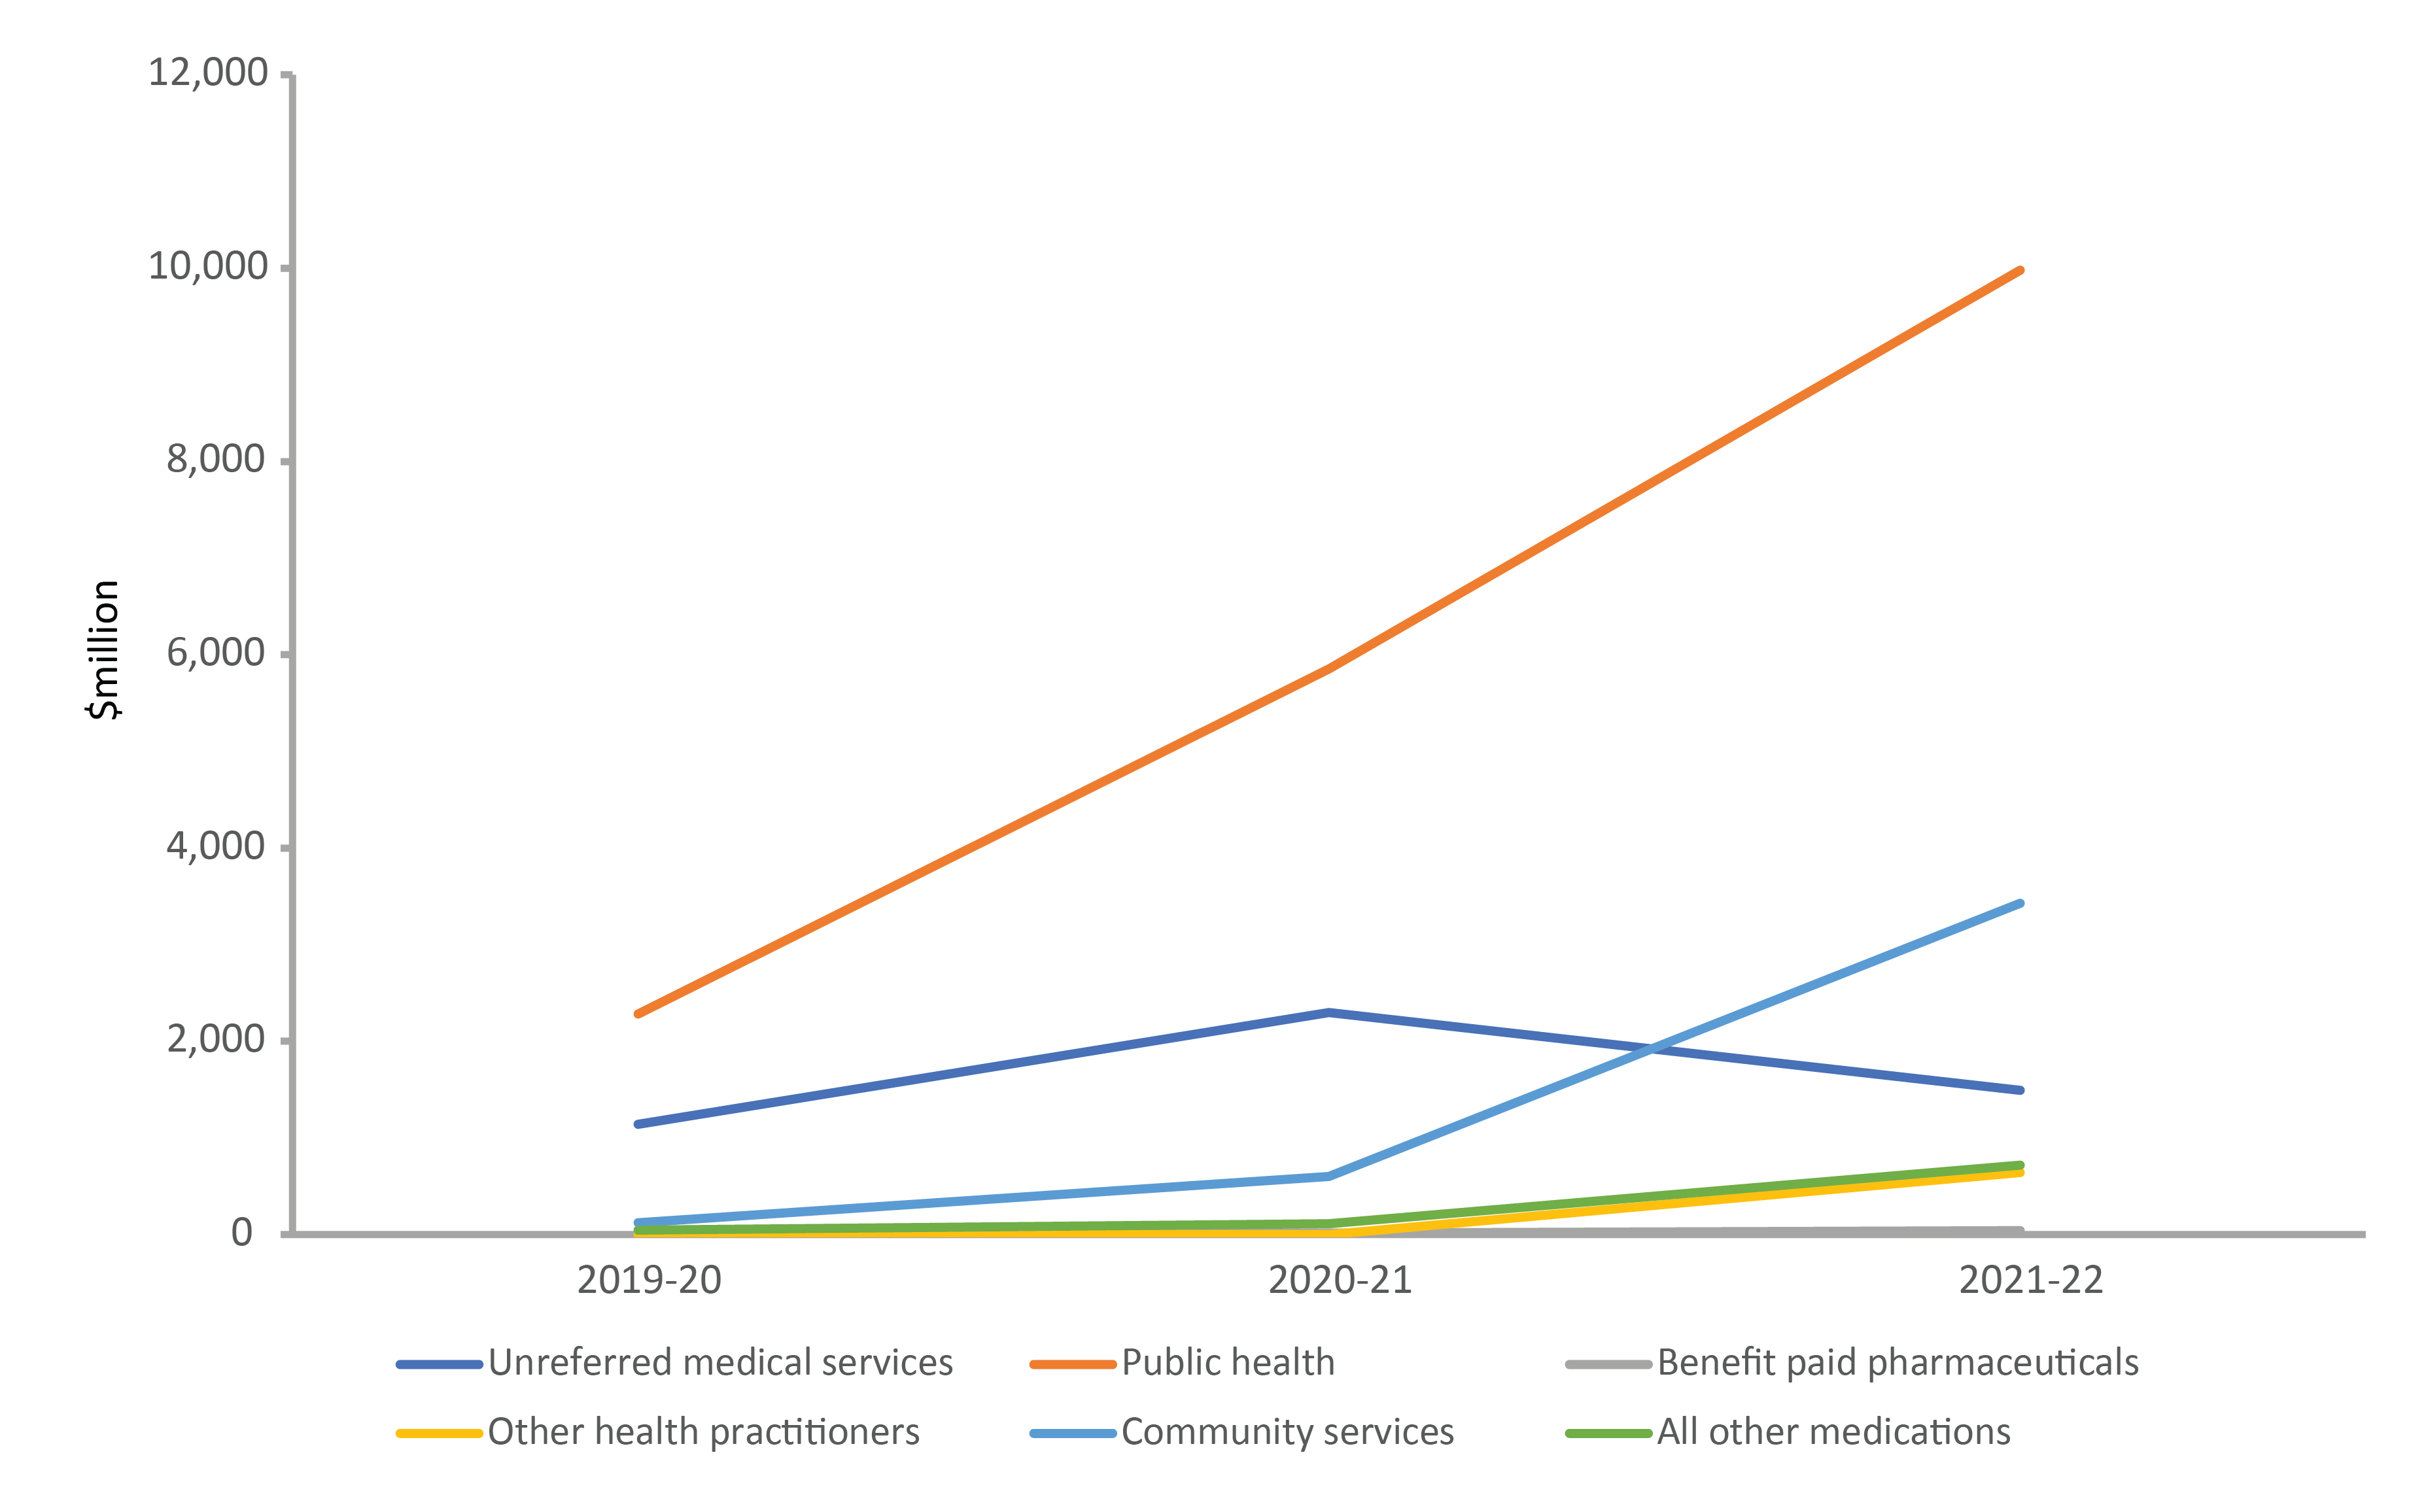 The line chart shows areas of spending under primary healthcare sourced by government and individuals from 2019-20 to 2021-22. The highest spending was for public health, followed by unreferred medical services, community services, PBS, other medications and other health practitioners. The individual spending accounted for a very small amount in PBS and unreferred medical services.